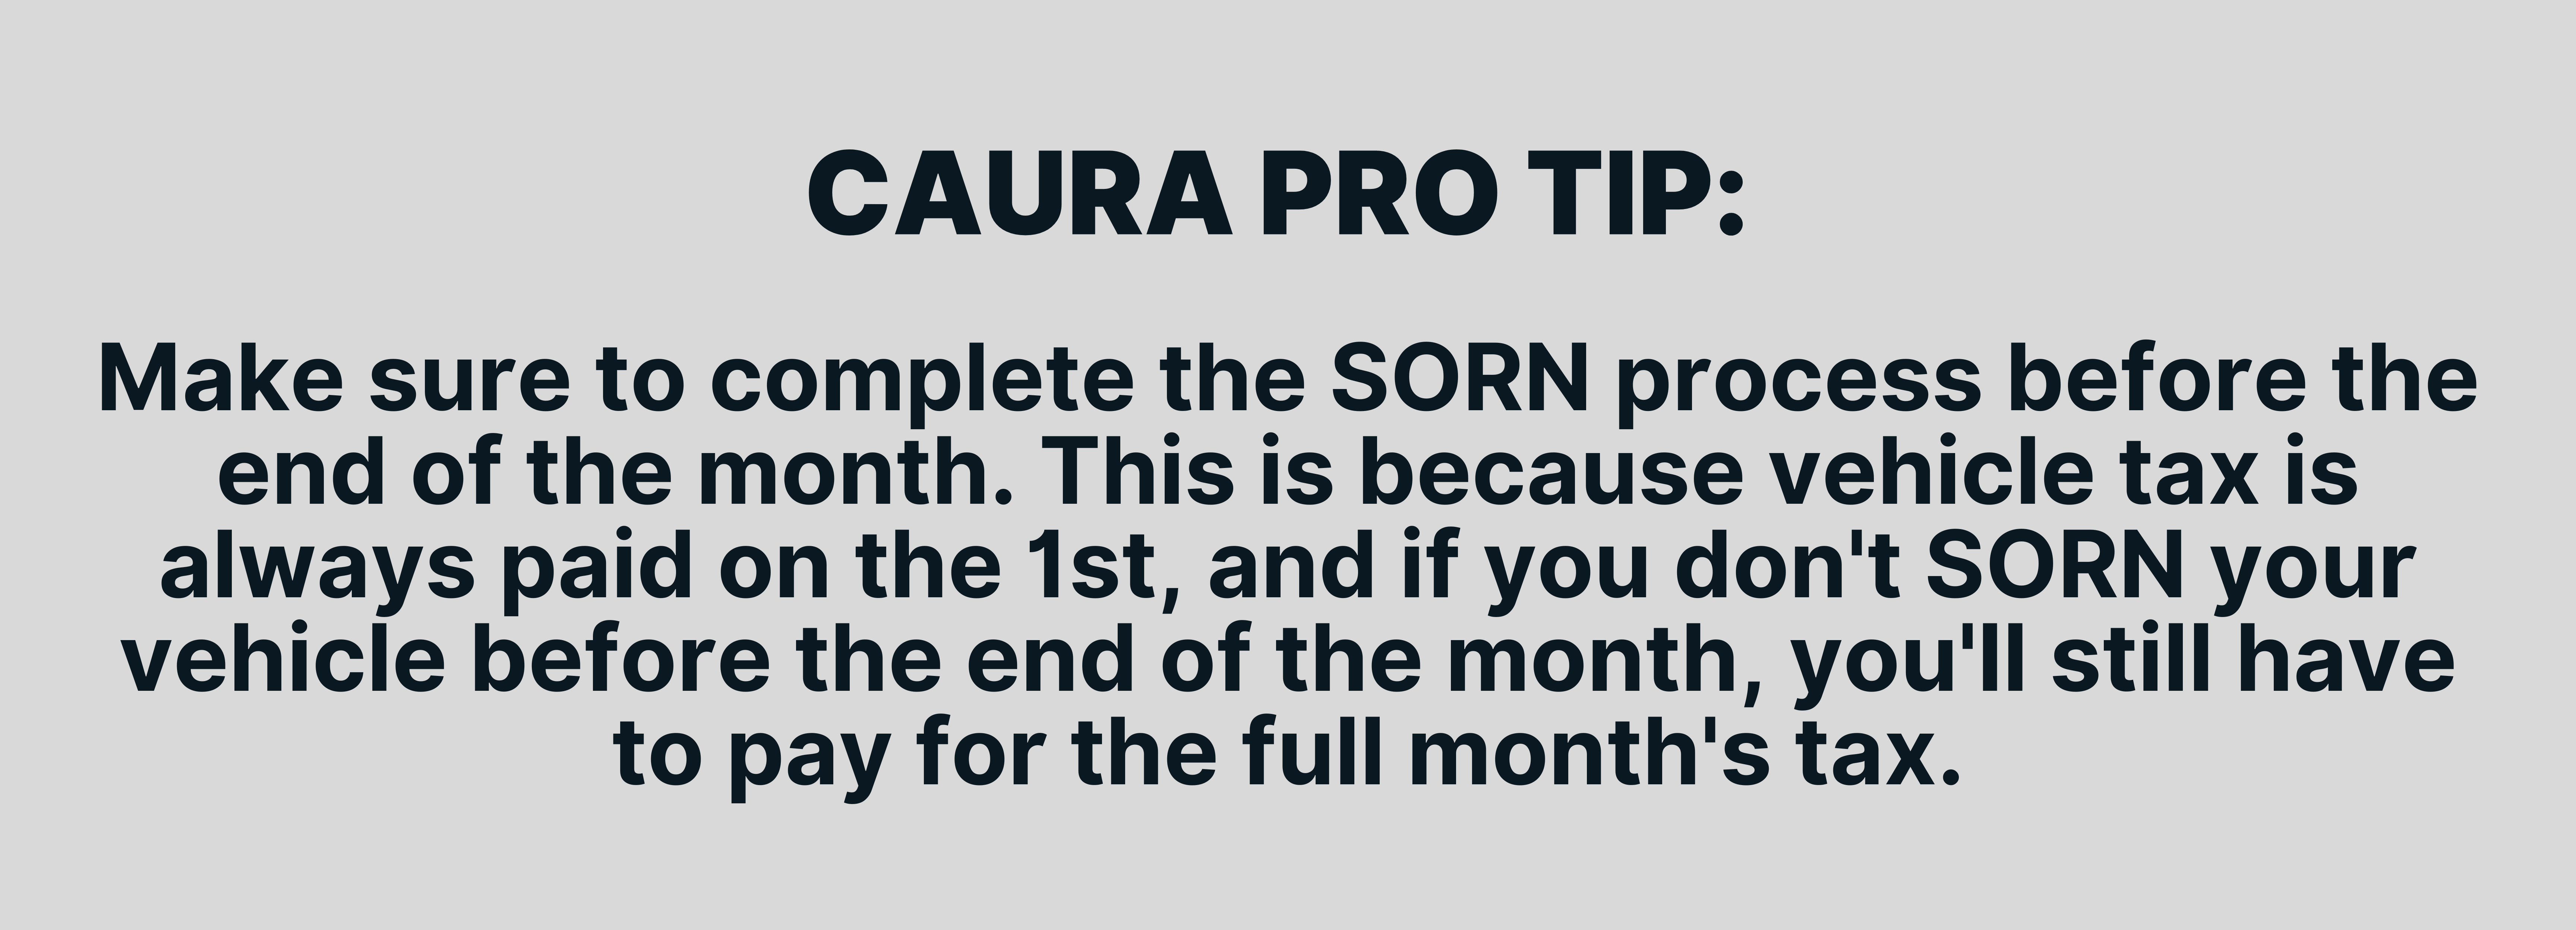 Make sure to complete the SORN process before the end of the month. This is because vehicle tax is always paid on the 1st, and if you don't SORN your vehicle before the end of the month, you'll still have to pay for the full month's tax.